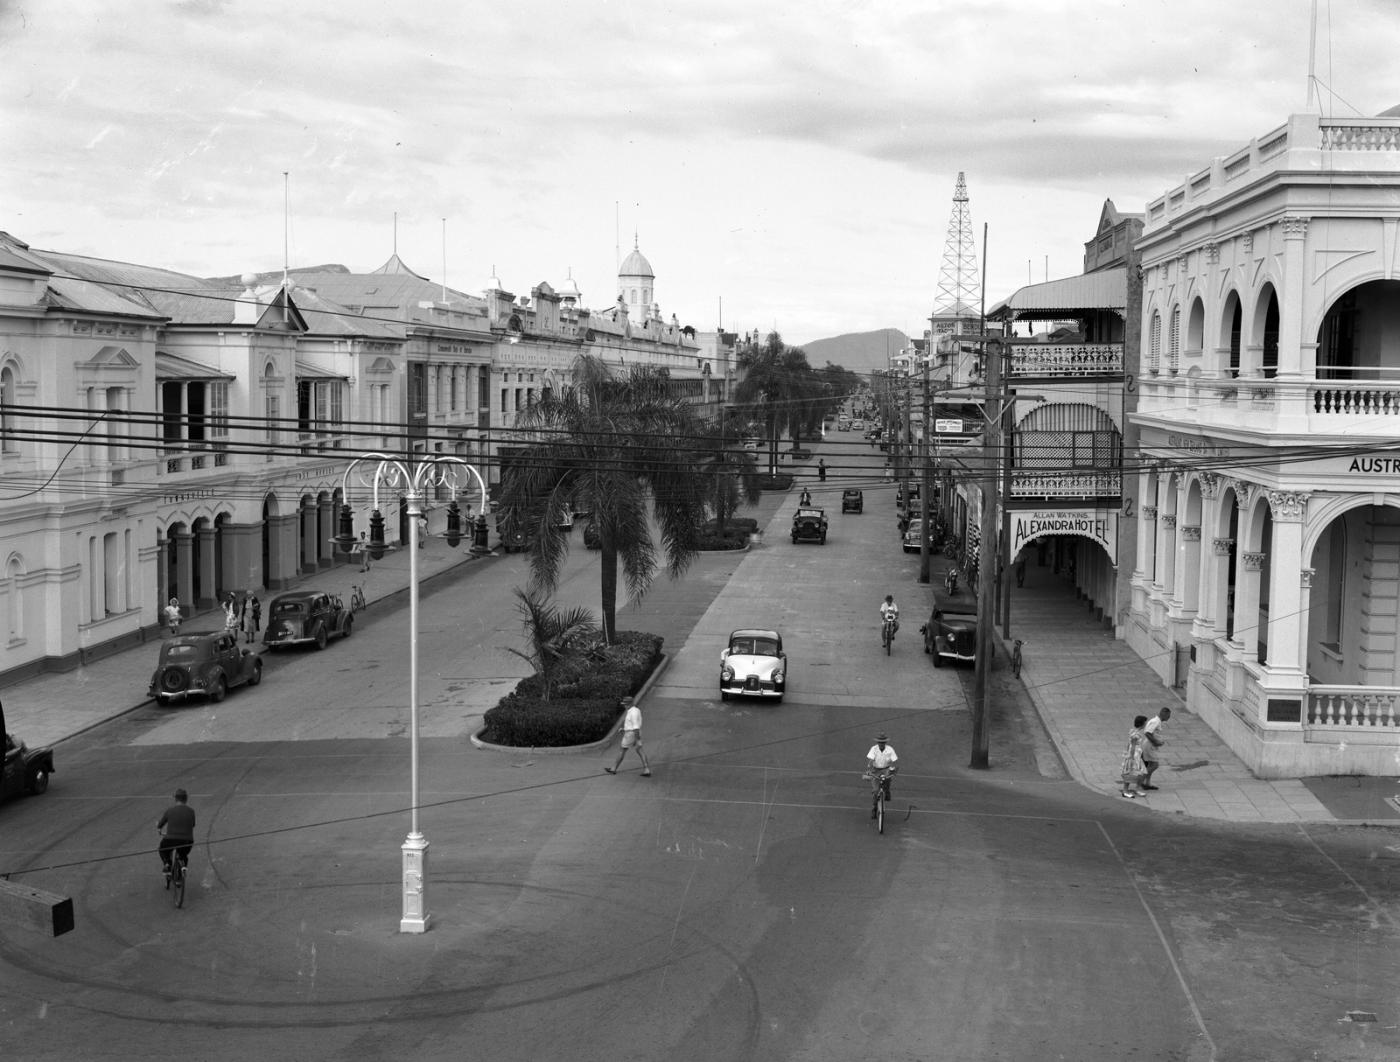 View of the main street of Townsville with people gathered on the street